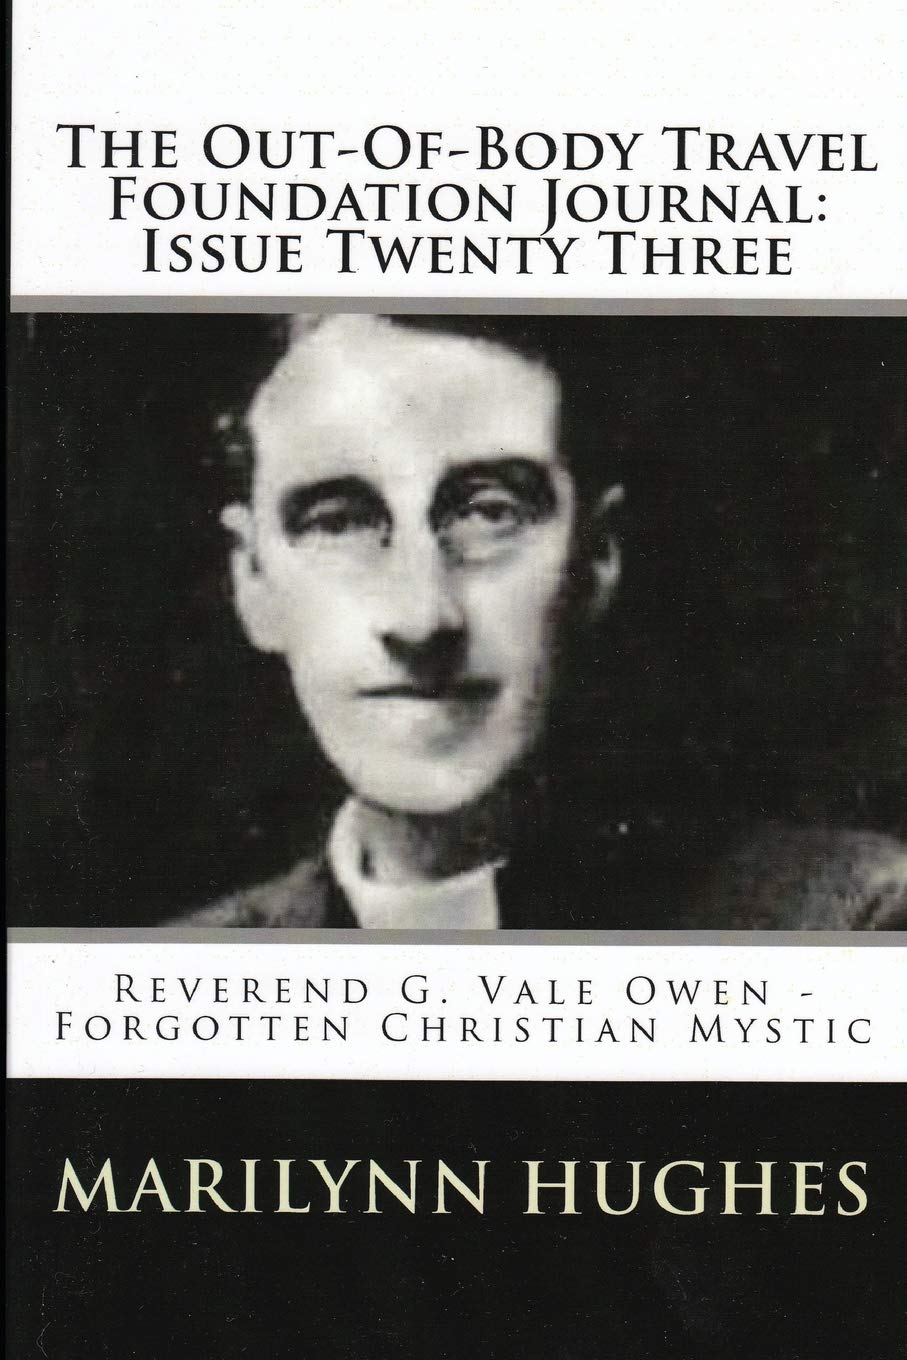 Reverend G. Vale Owen – Forgotten Christian Mystic, Compiled and Edited by Marilynn Hughes